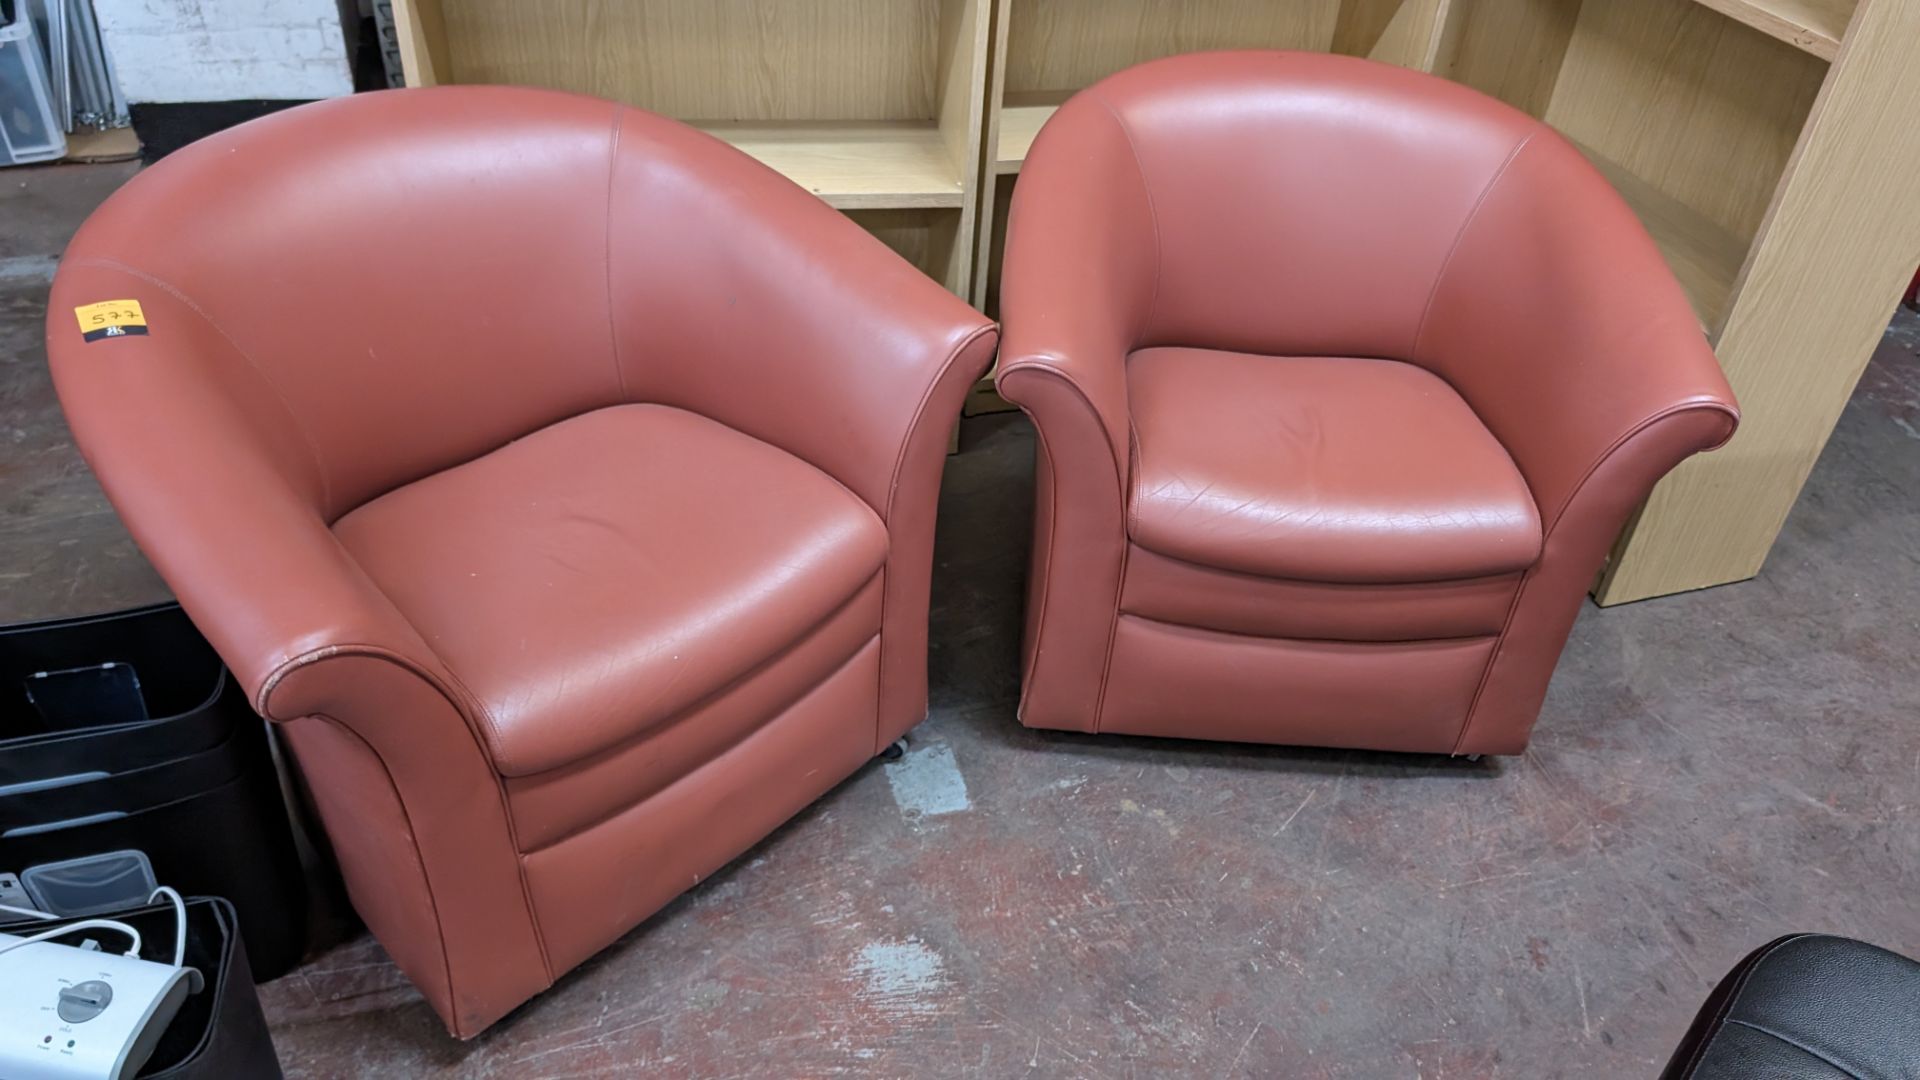 Pair of tub chairs on wheels in dark salmon/terracotta leather/pleather finish - Image 3 of 8